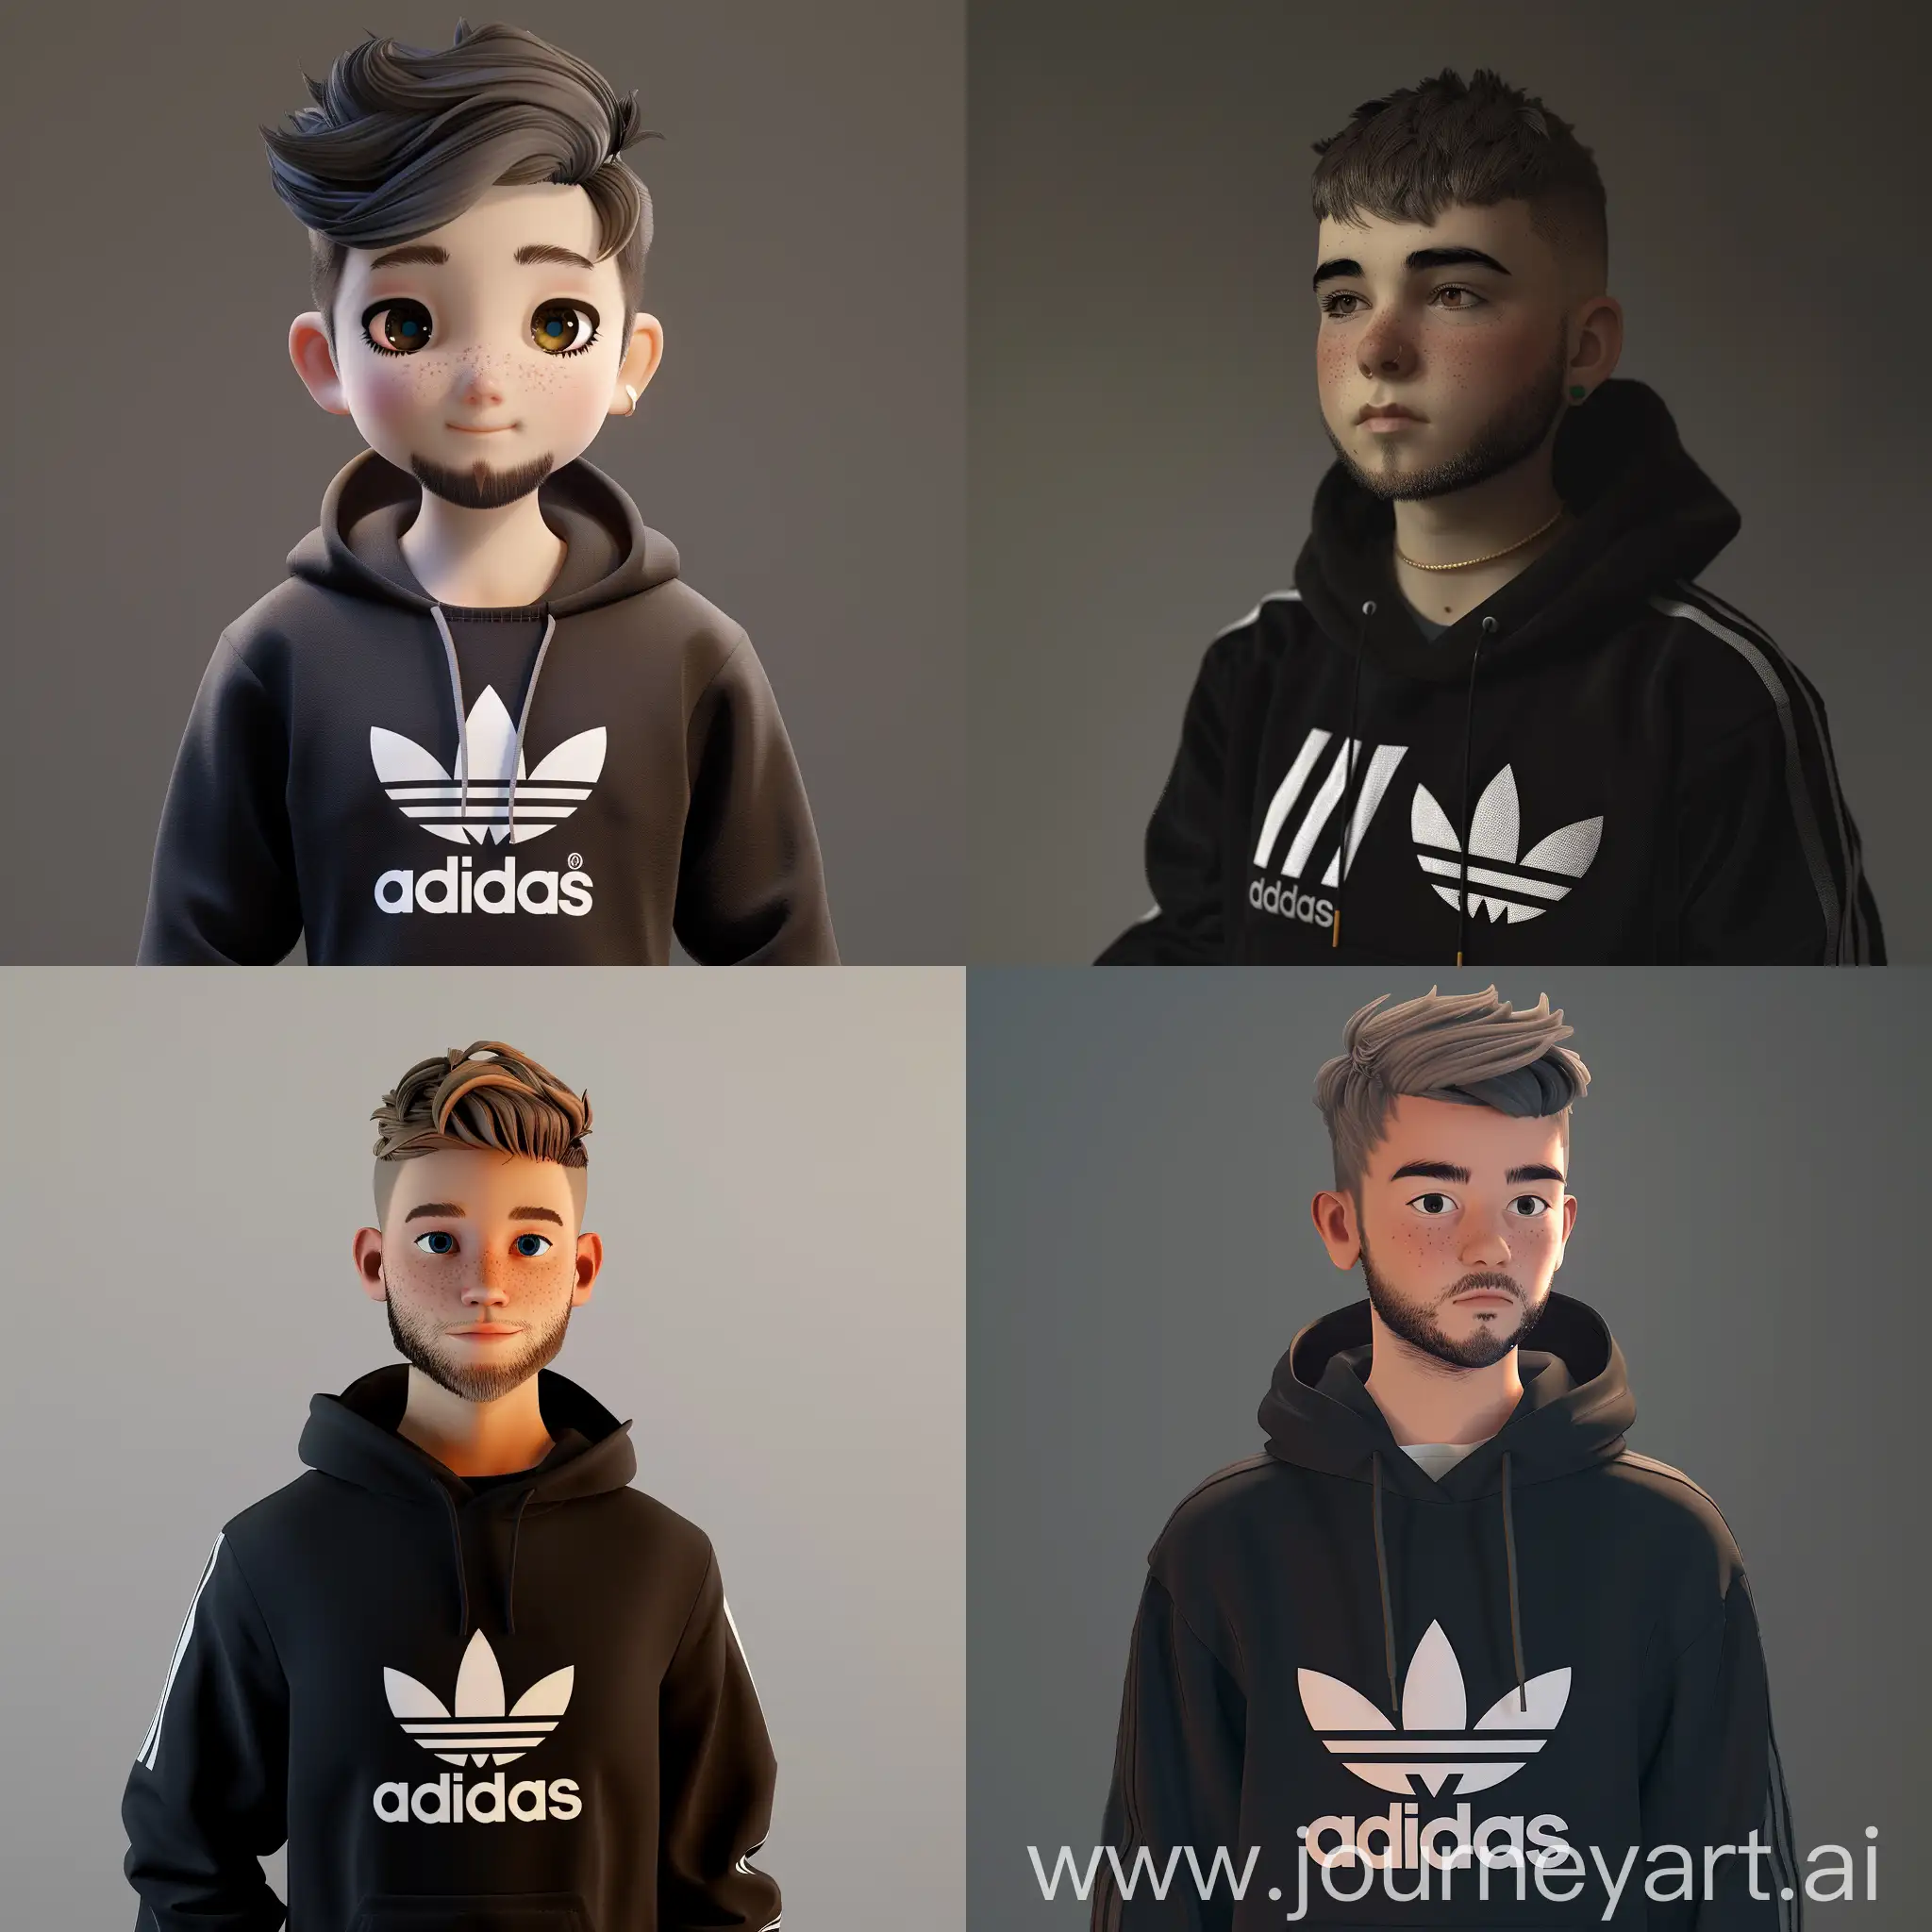 Young-Man-in-Adidas-Hoodie-Casual-Portrait-for-Profile-Picture-or-3D-Animation